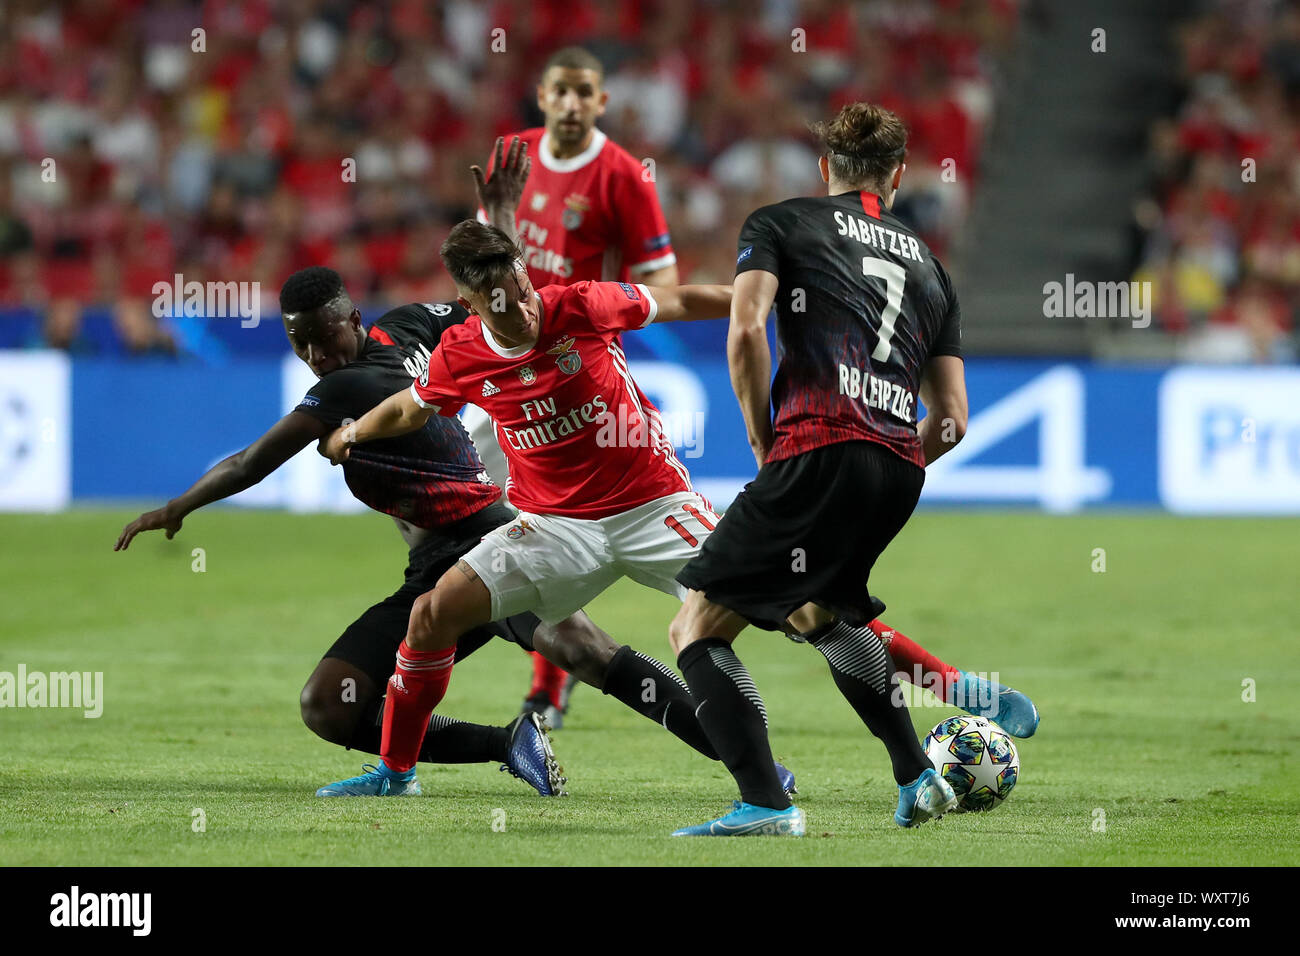 Lisbon. 17th Sep, 2019. Franco Cervi (front C) of SL Benfica vies with Nordi Mukiele (L) and Marcel Sabitzer of RB Leipzig during the UEFA Champions League Group G football match in Lisbon, Portugal on Sept. 17, 2019. Credit: Pedro Fiuza/Xinhua Stock Photo